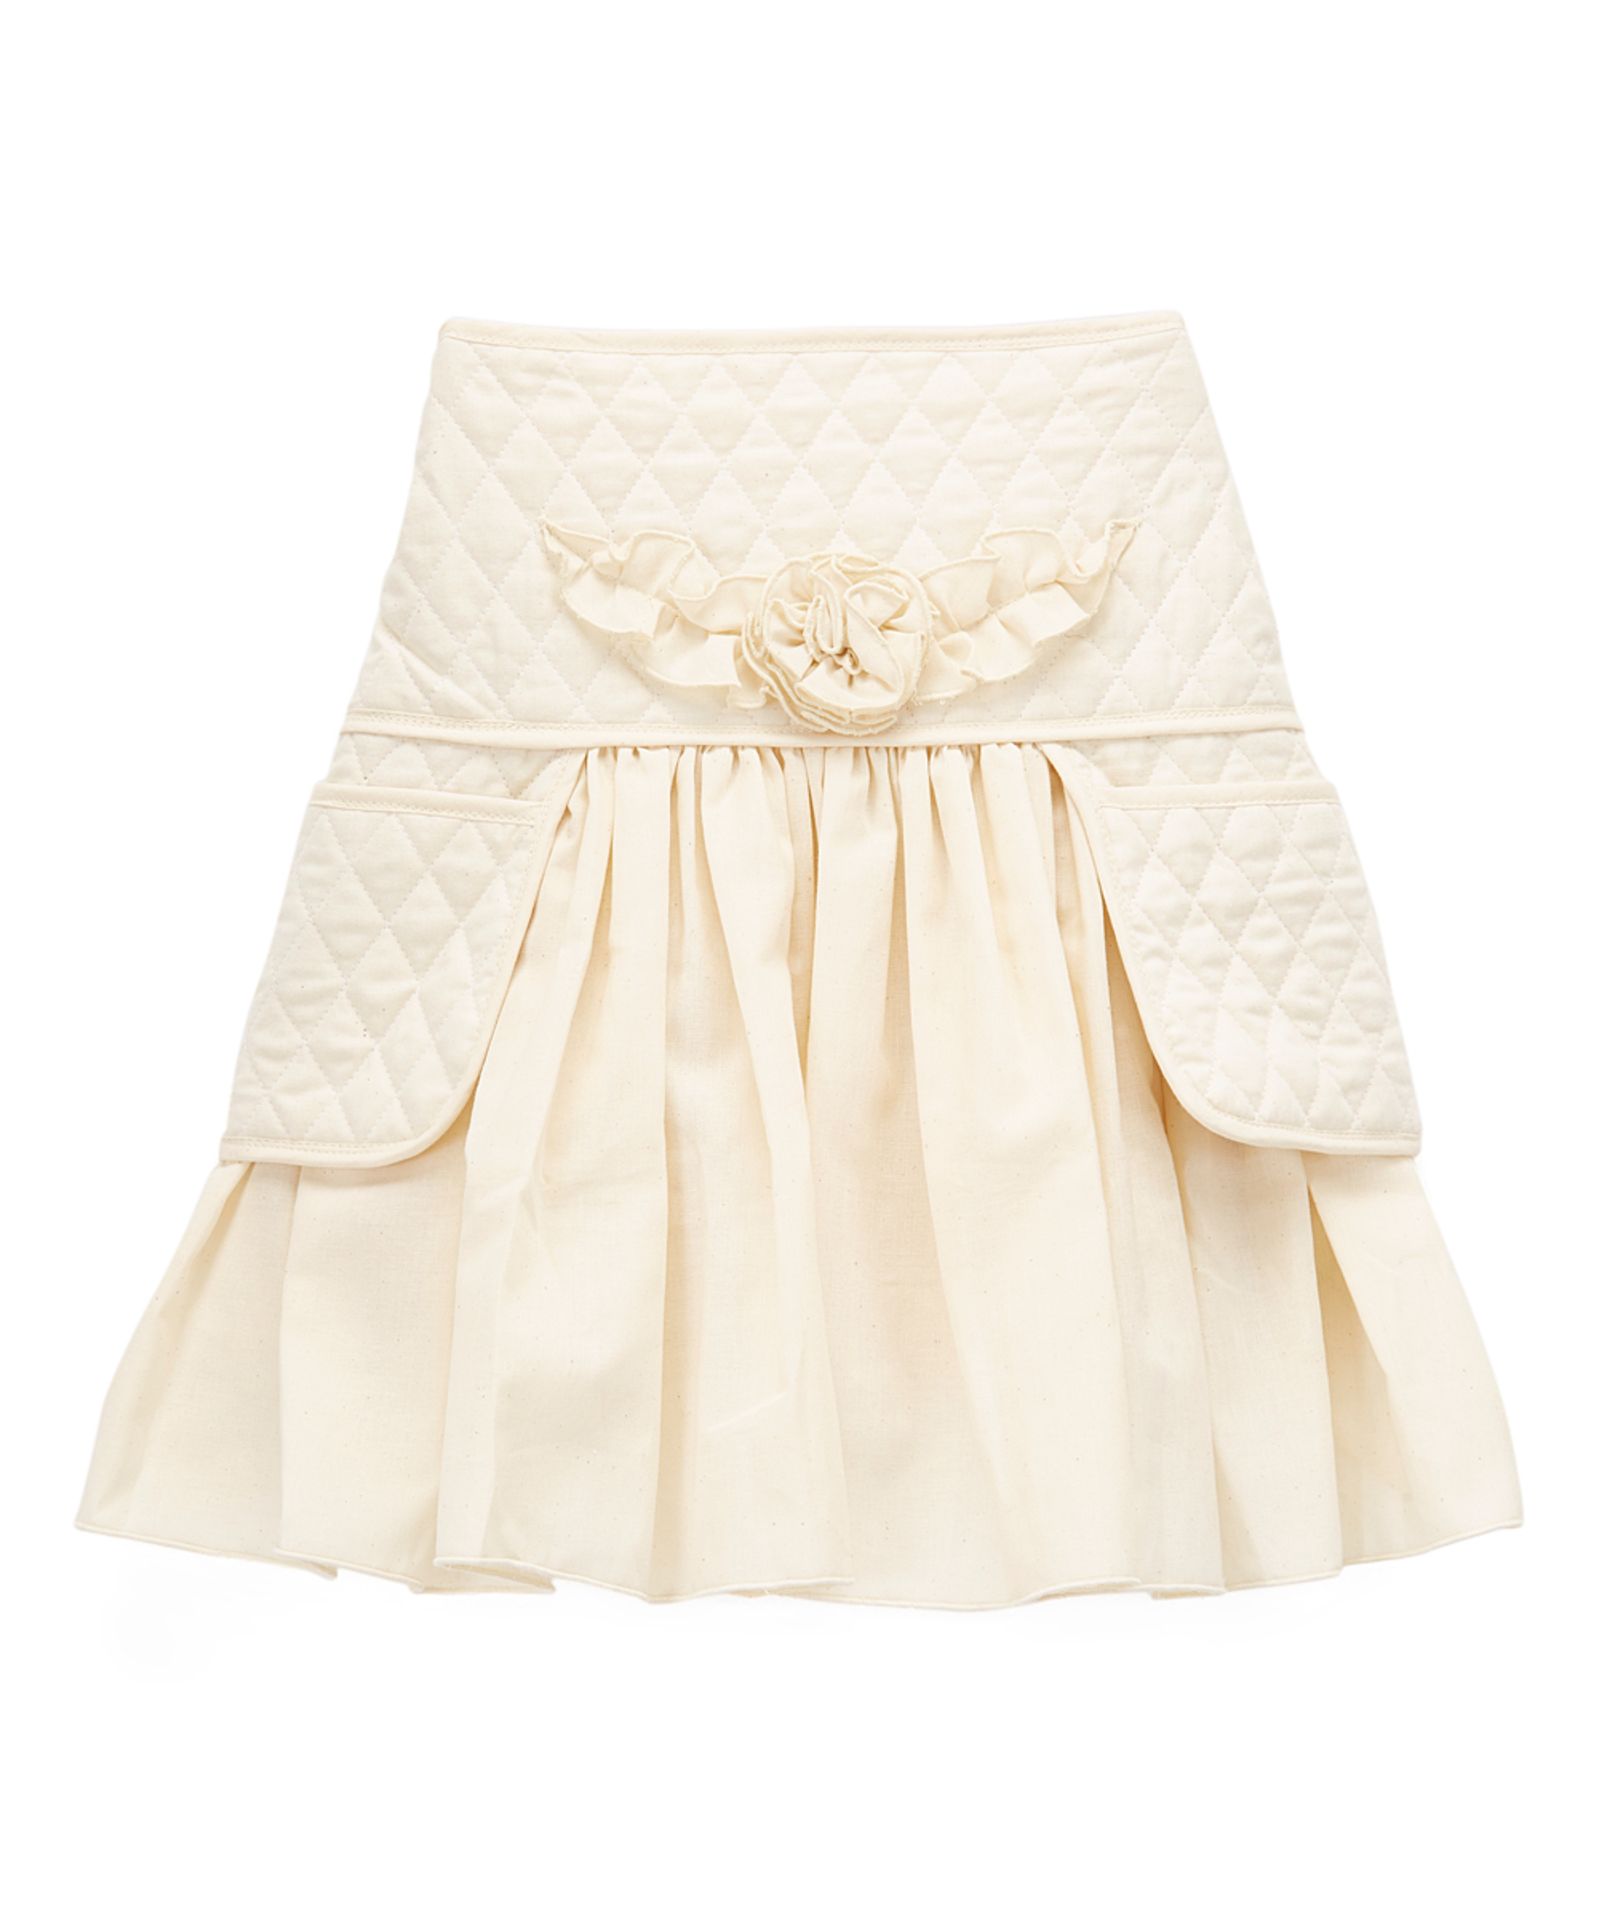 Little Miss Fashion Ivory Quilt-Accent A-Line Skirt - Infant, Toddler & Girls (Us Size: 12 Yrs) [